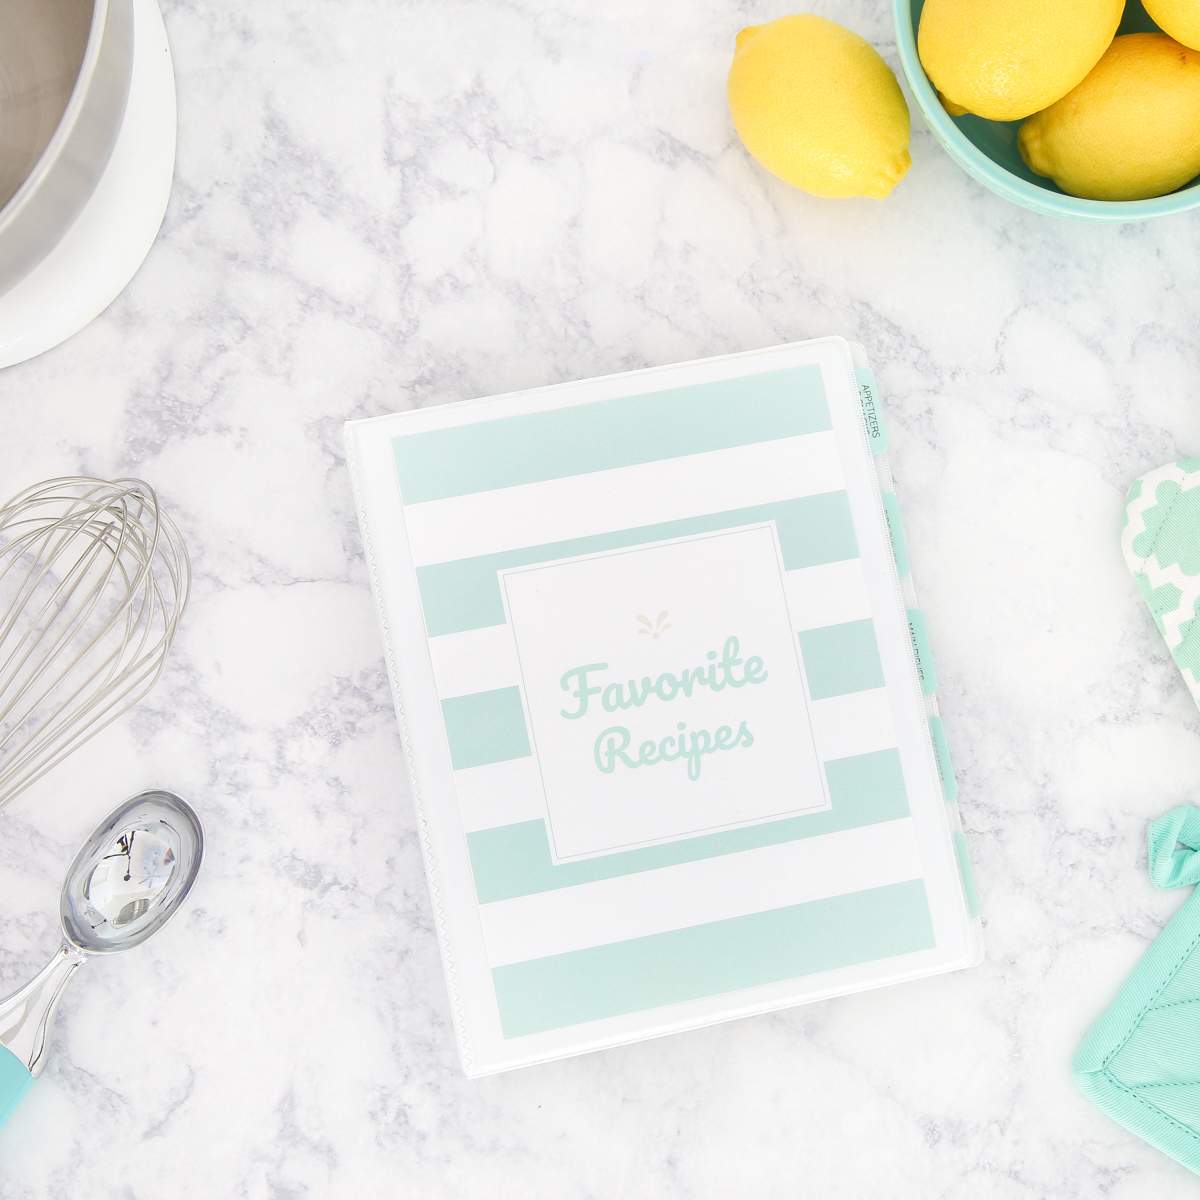 How to Make Your Dream Recipe Binder